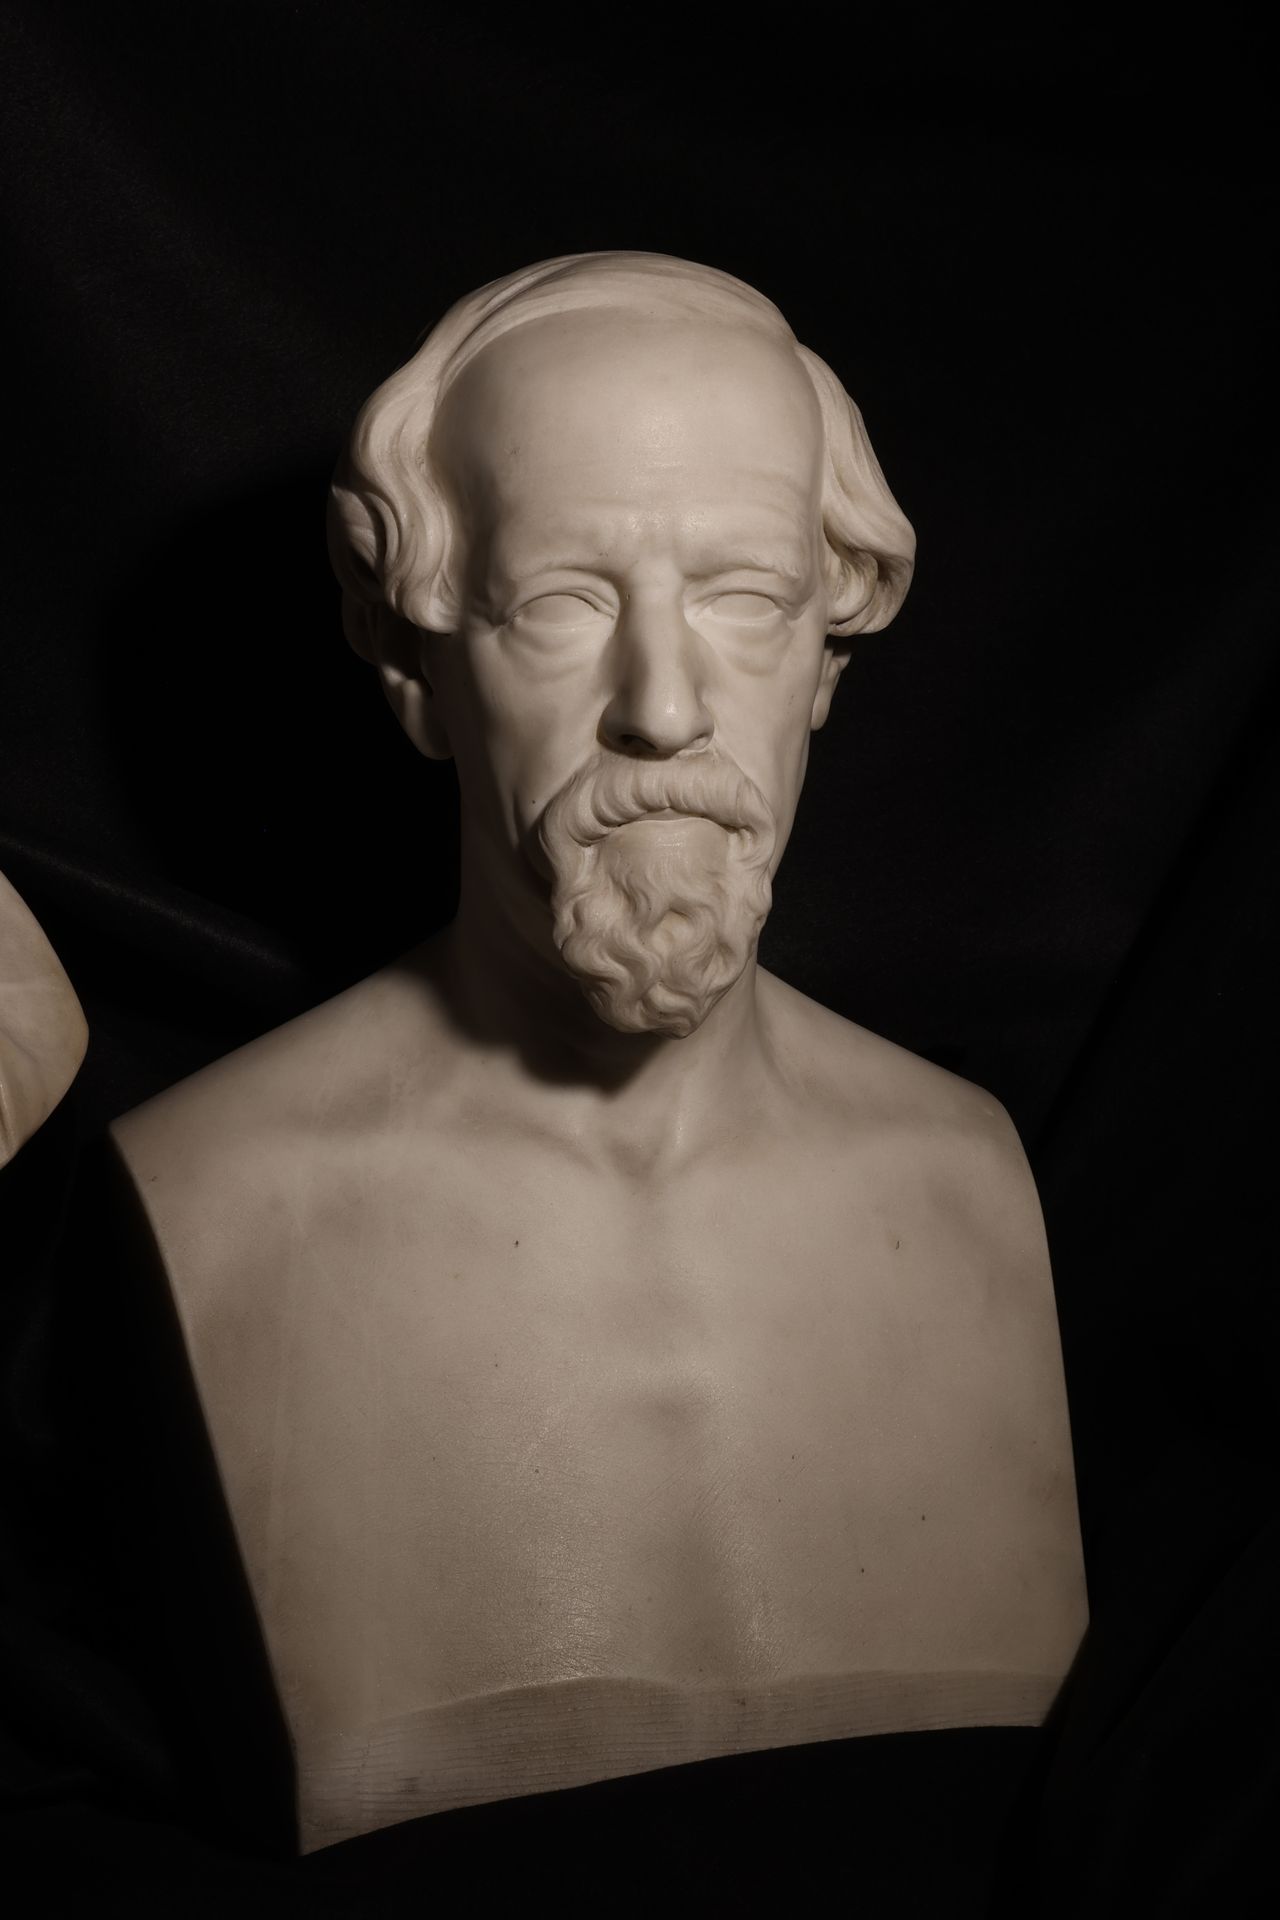 E. W. Wyon, Portrait Bust of Notable Man of Letters, Marble Se vende sin reserva&hellip;